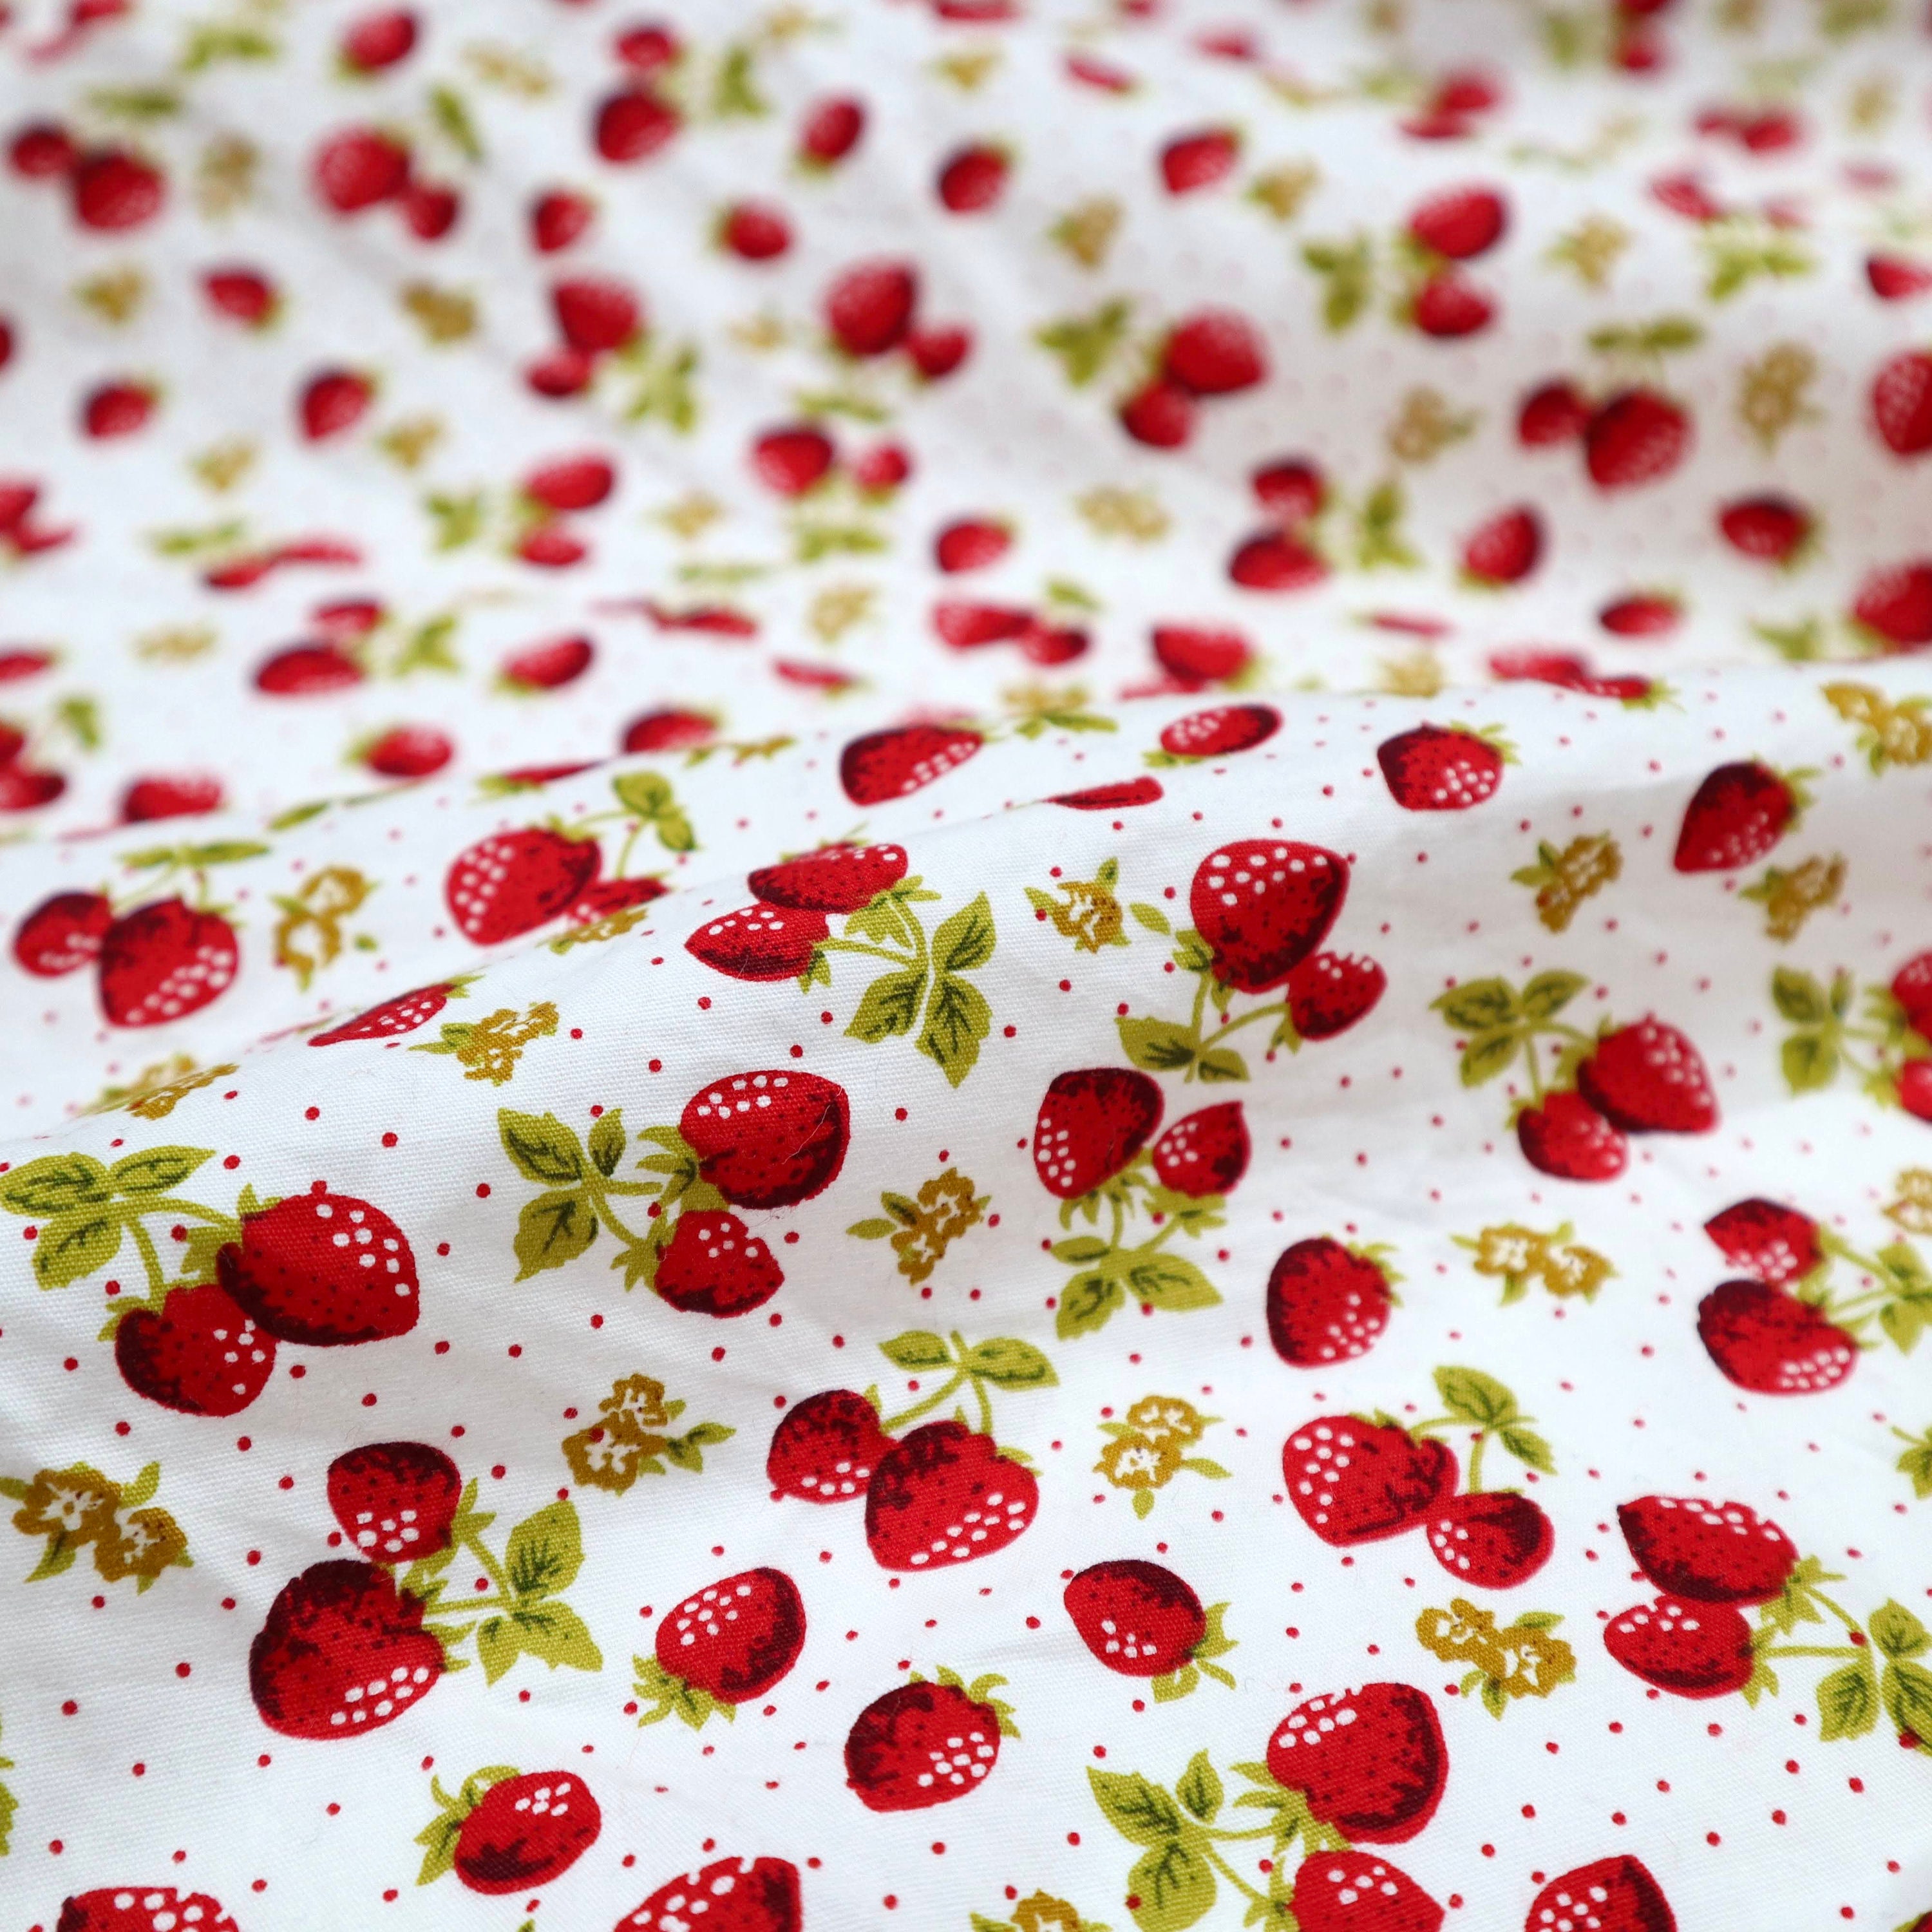 Little Red Strawberry Fabric - Cute Strawberry Printed on White Background,  Strawberry on White Polka Dot Fabric, Quilting Cotton by Yard